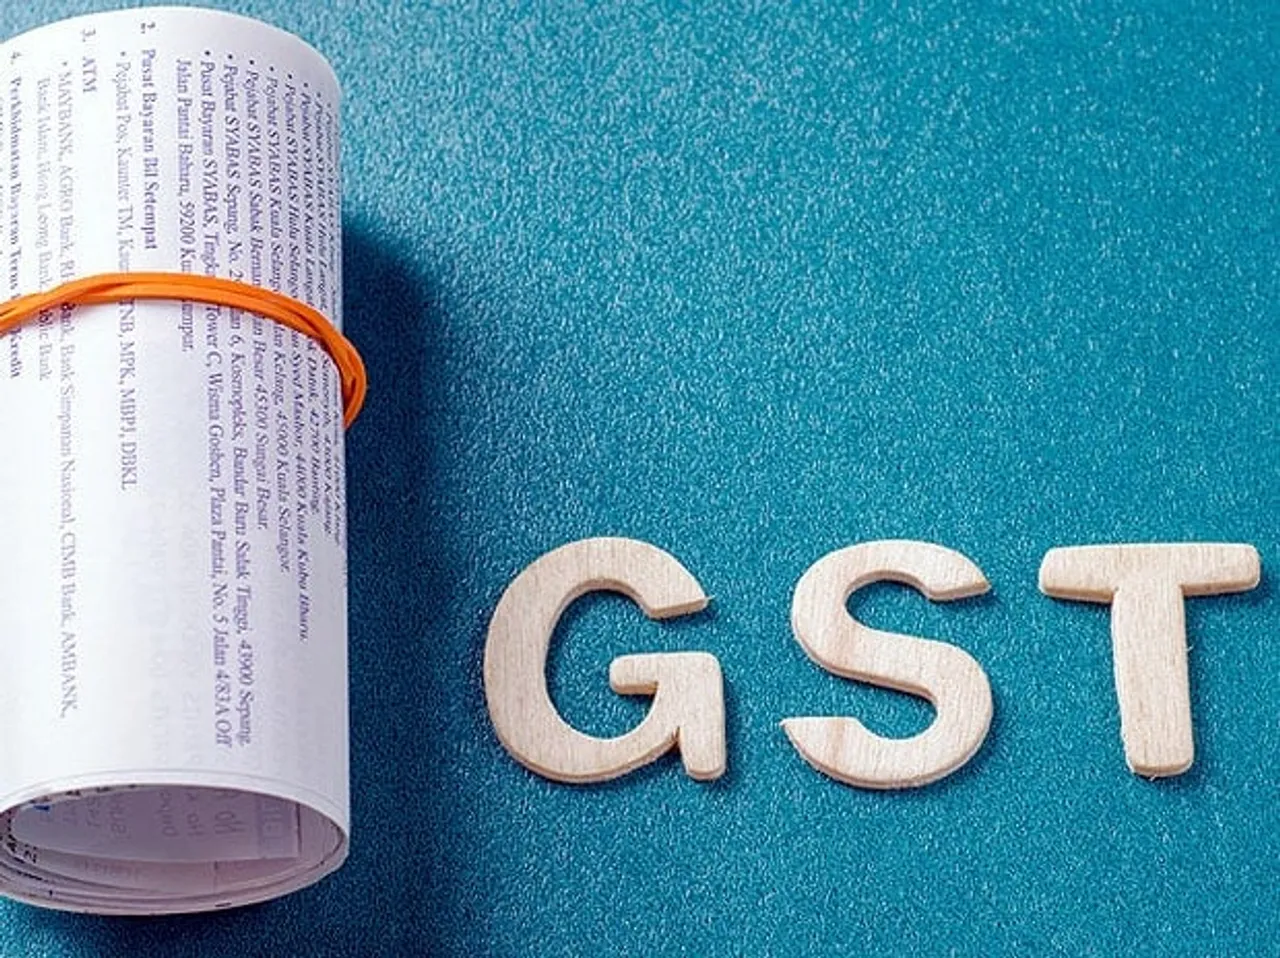 KDK Softwares launches toll free helpline for resolving GST queries